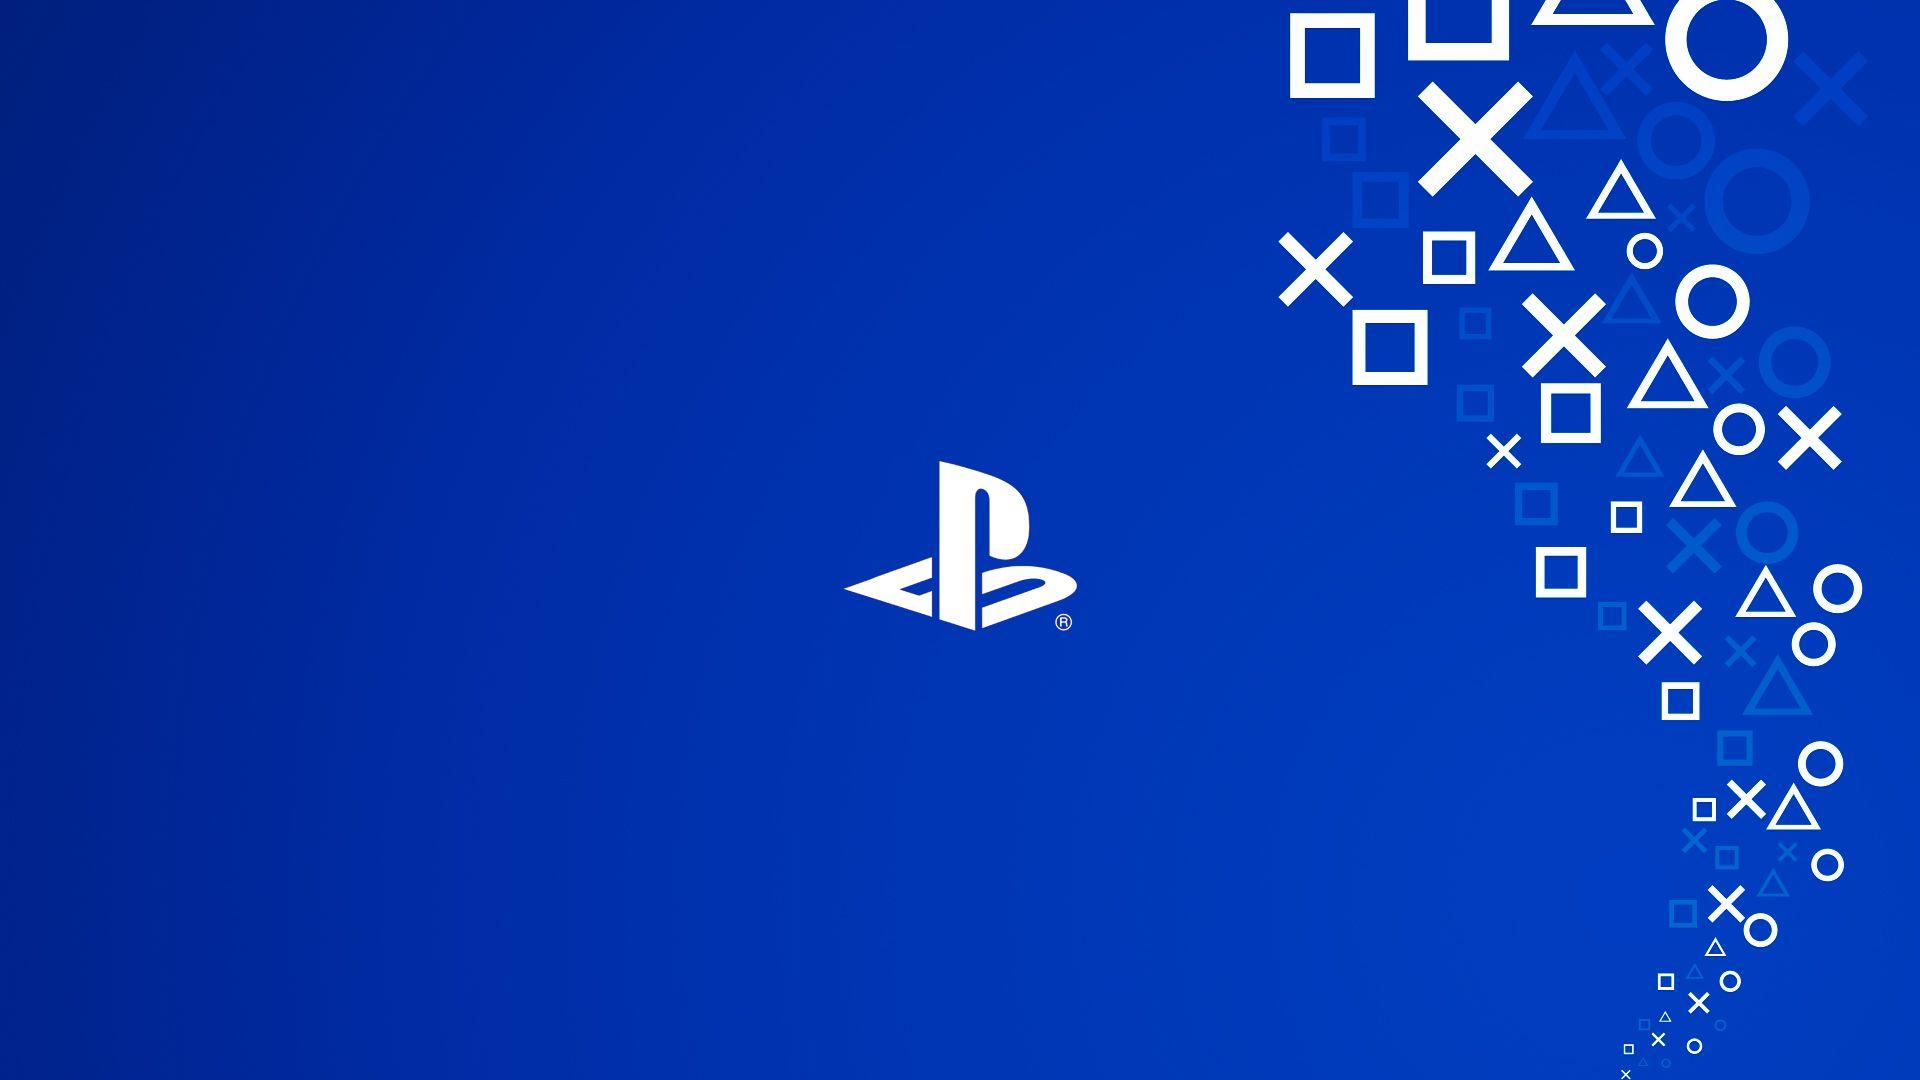 PS5 Logo - I made a logo for the PS5, figured people here might like it ...